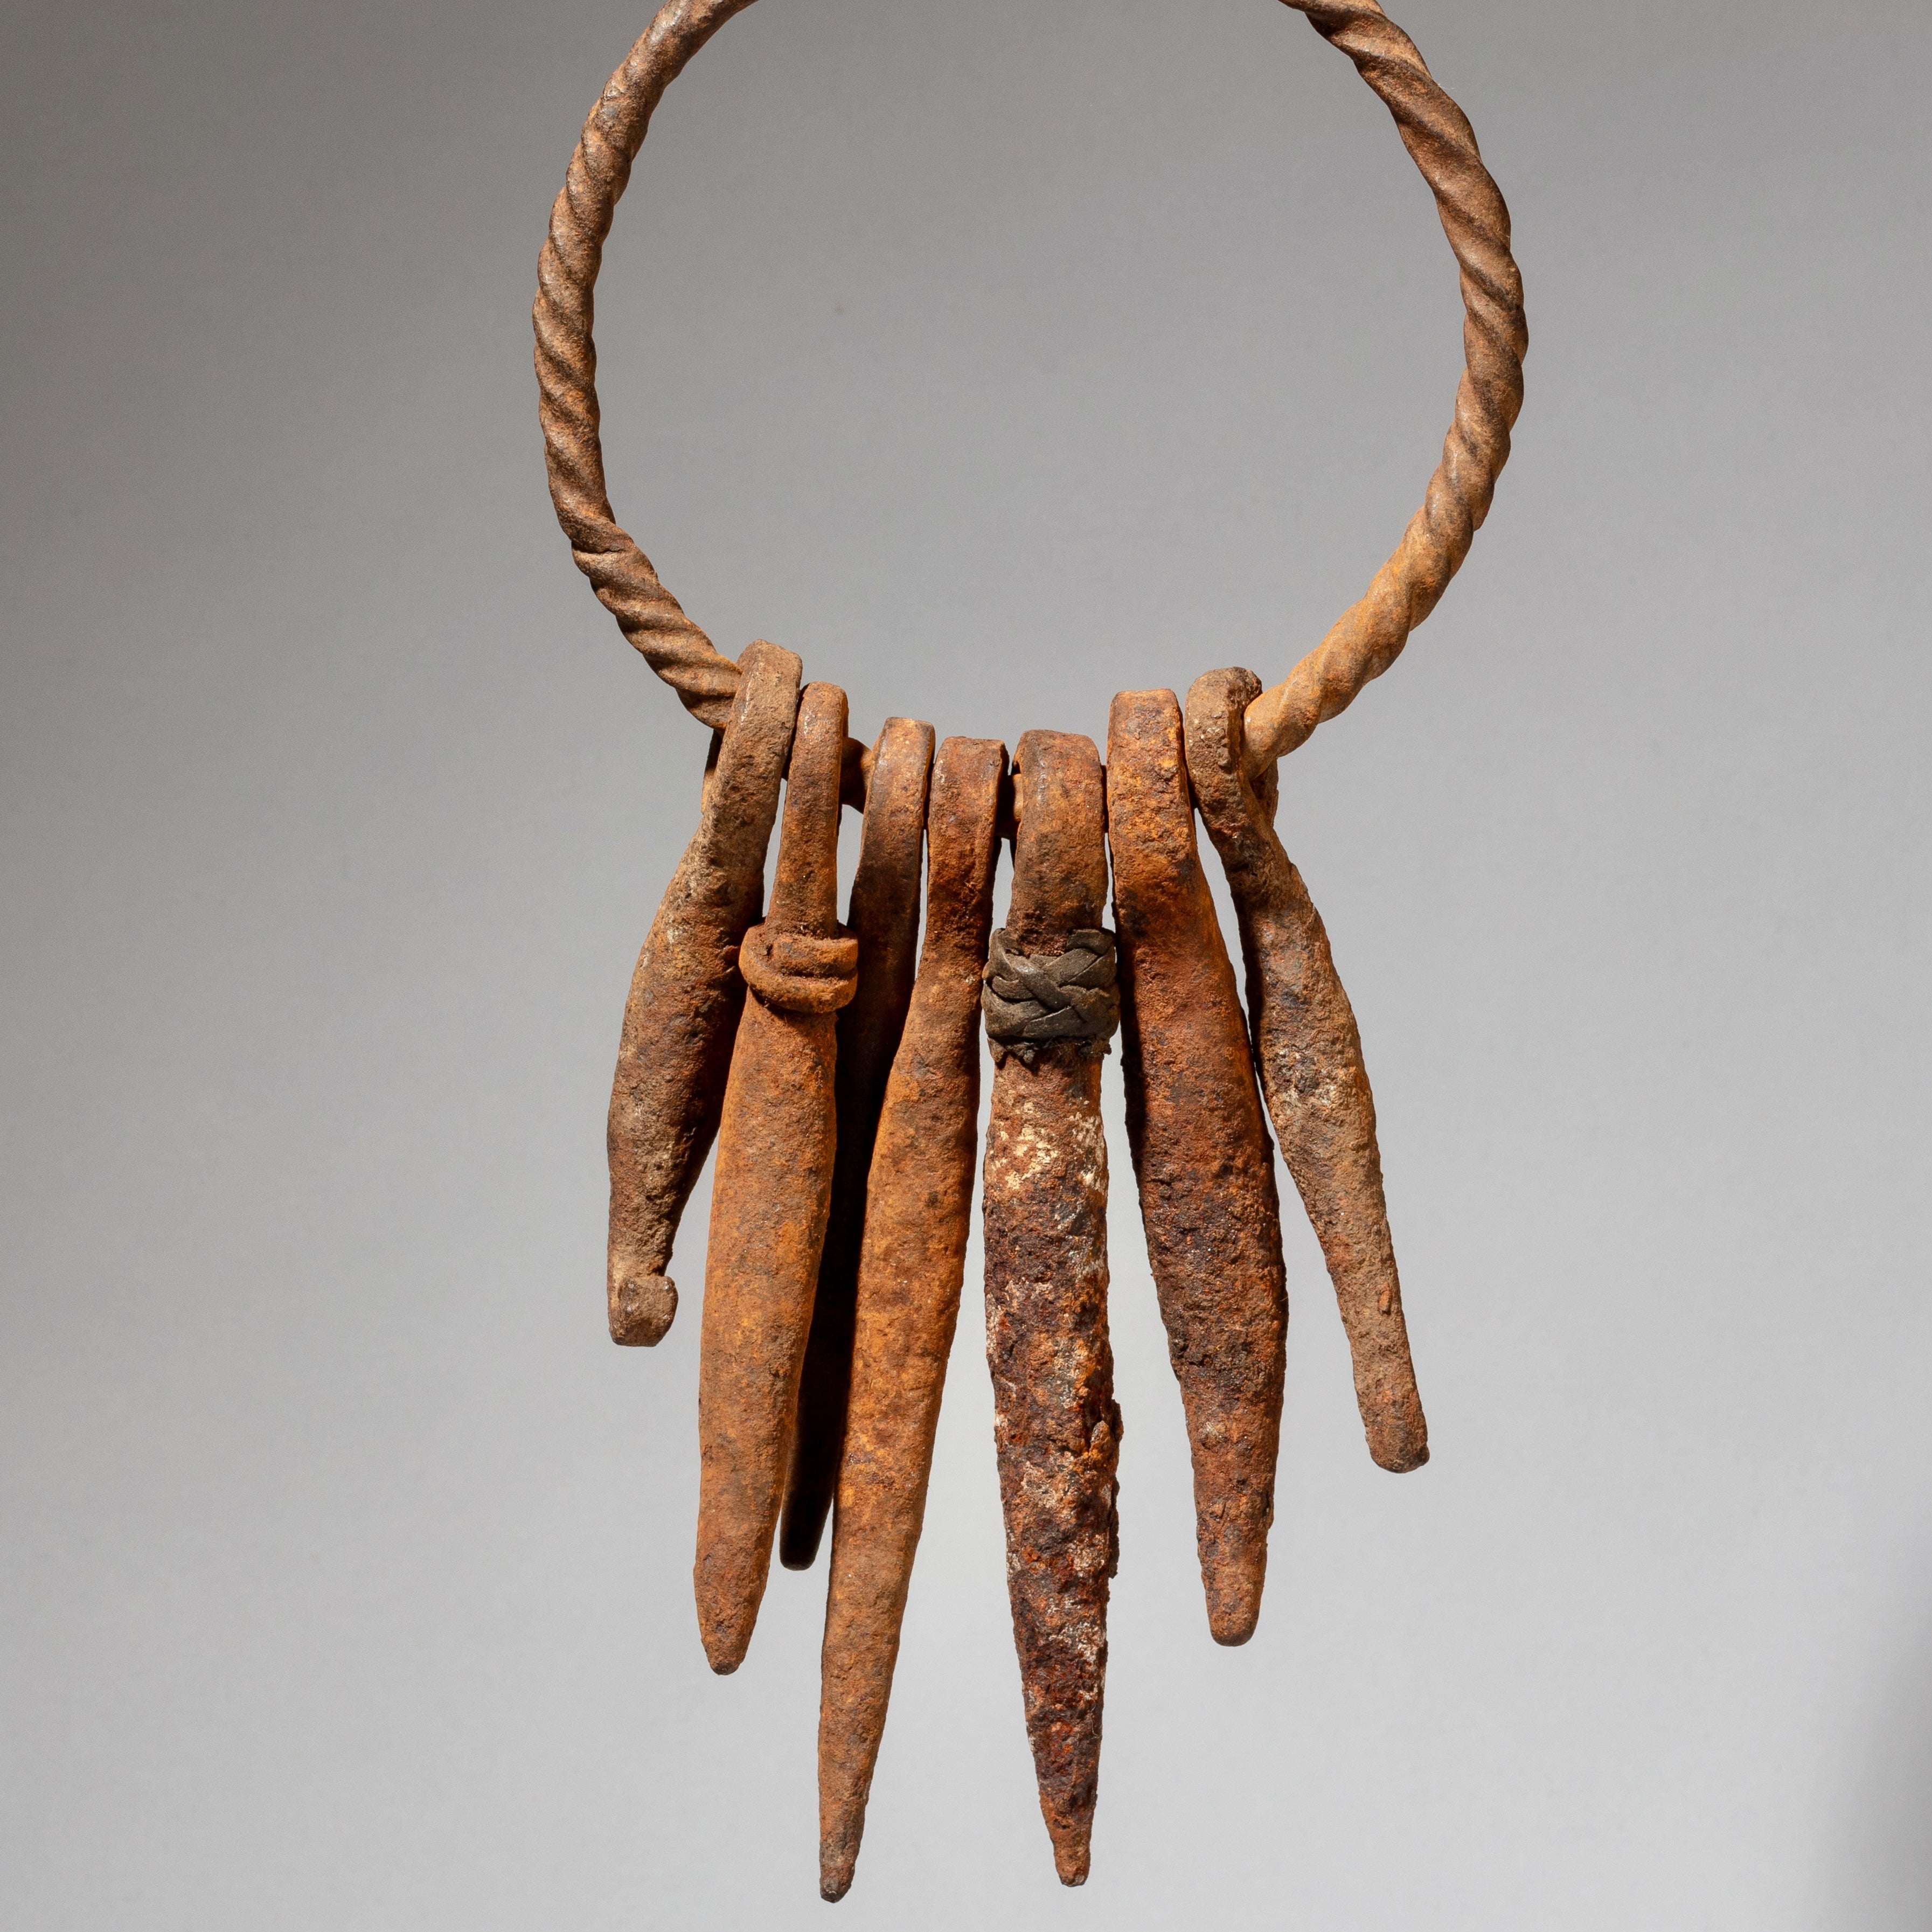 NATURALLY SHAPED IRON CURRENCY CLUSTER, KIRDI TRIBE OF CAMEROON W.AFRICA( No 2247)